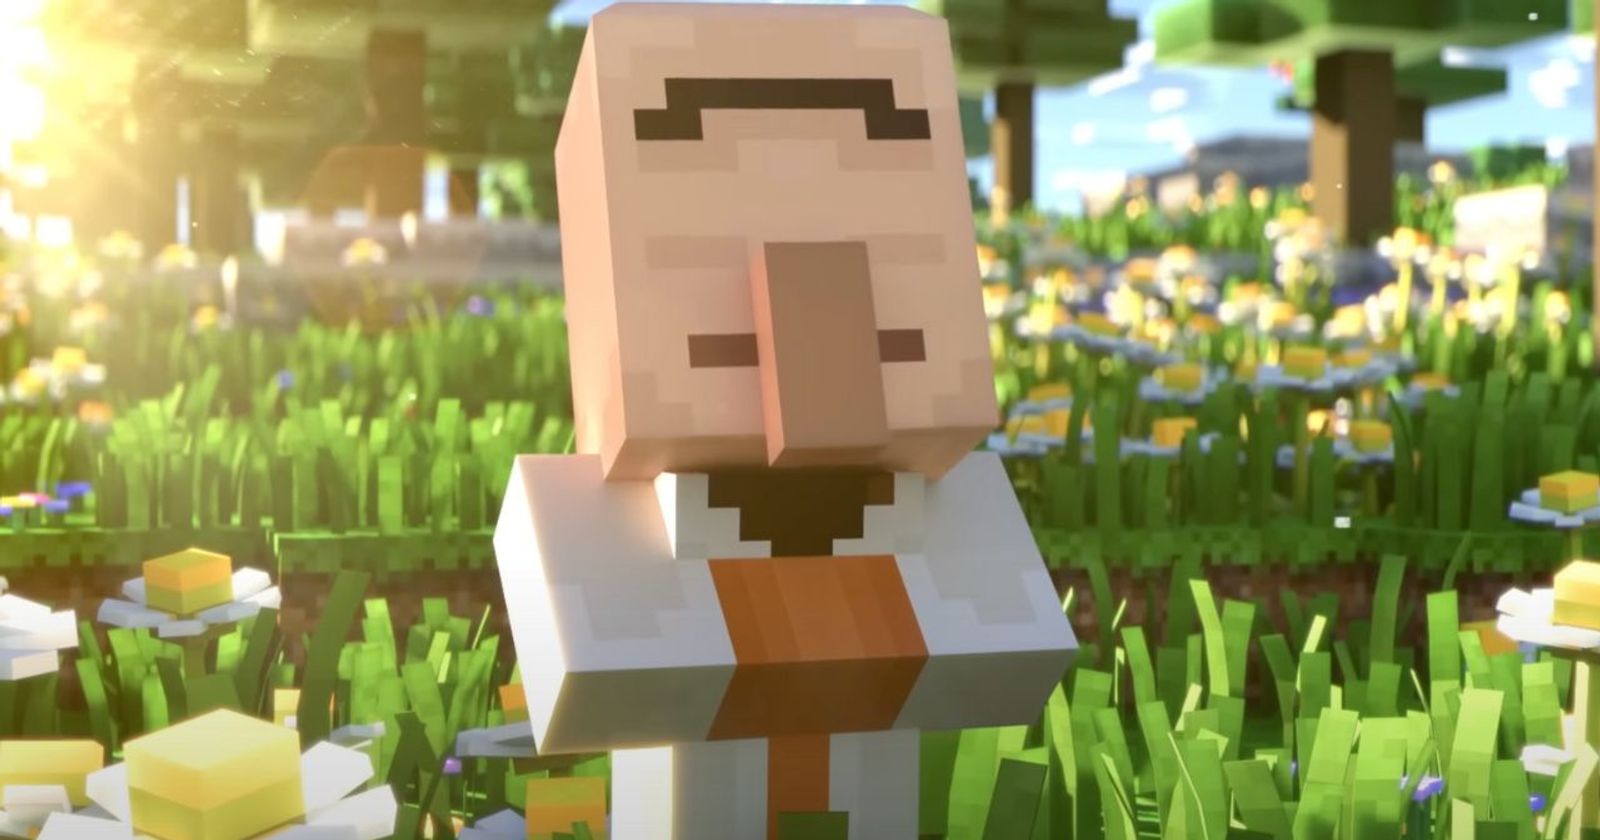 Minecraft Legends: How To Claim The Deluxe Skin Pack